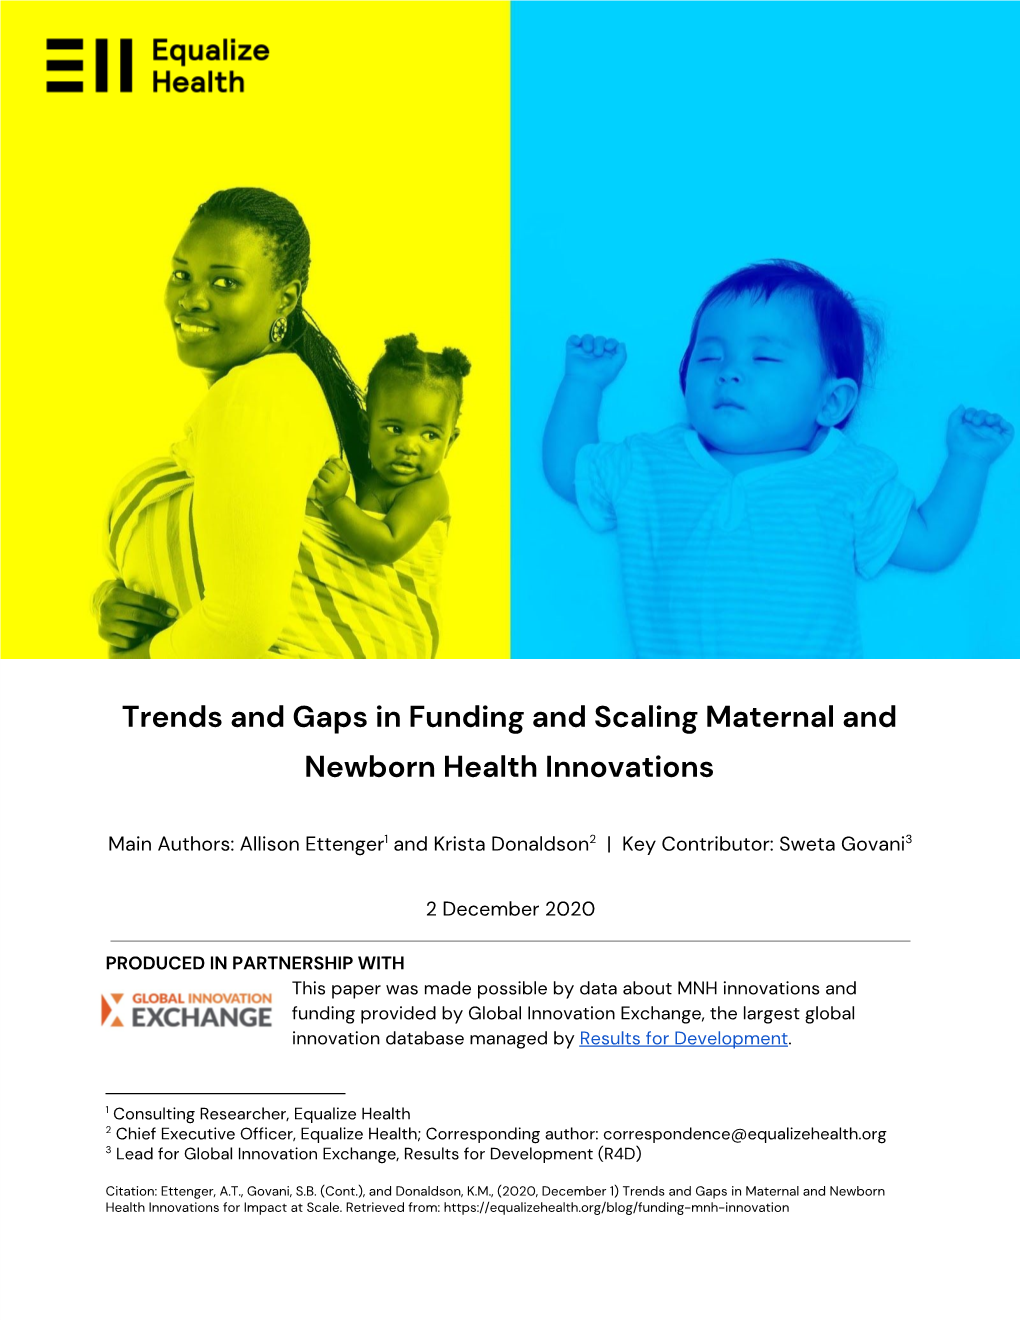 Trends and Gaps in Funding and Scaling Maternal and Newborn Health Innovations